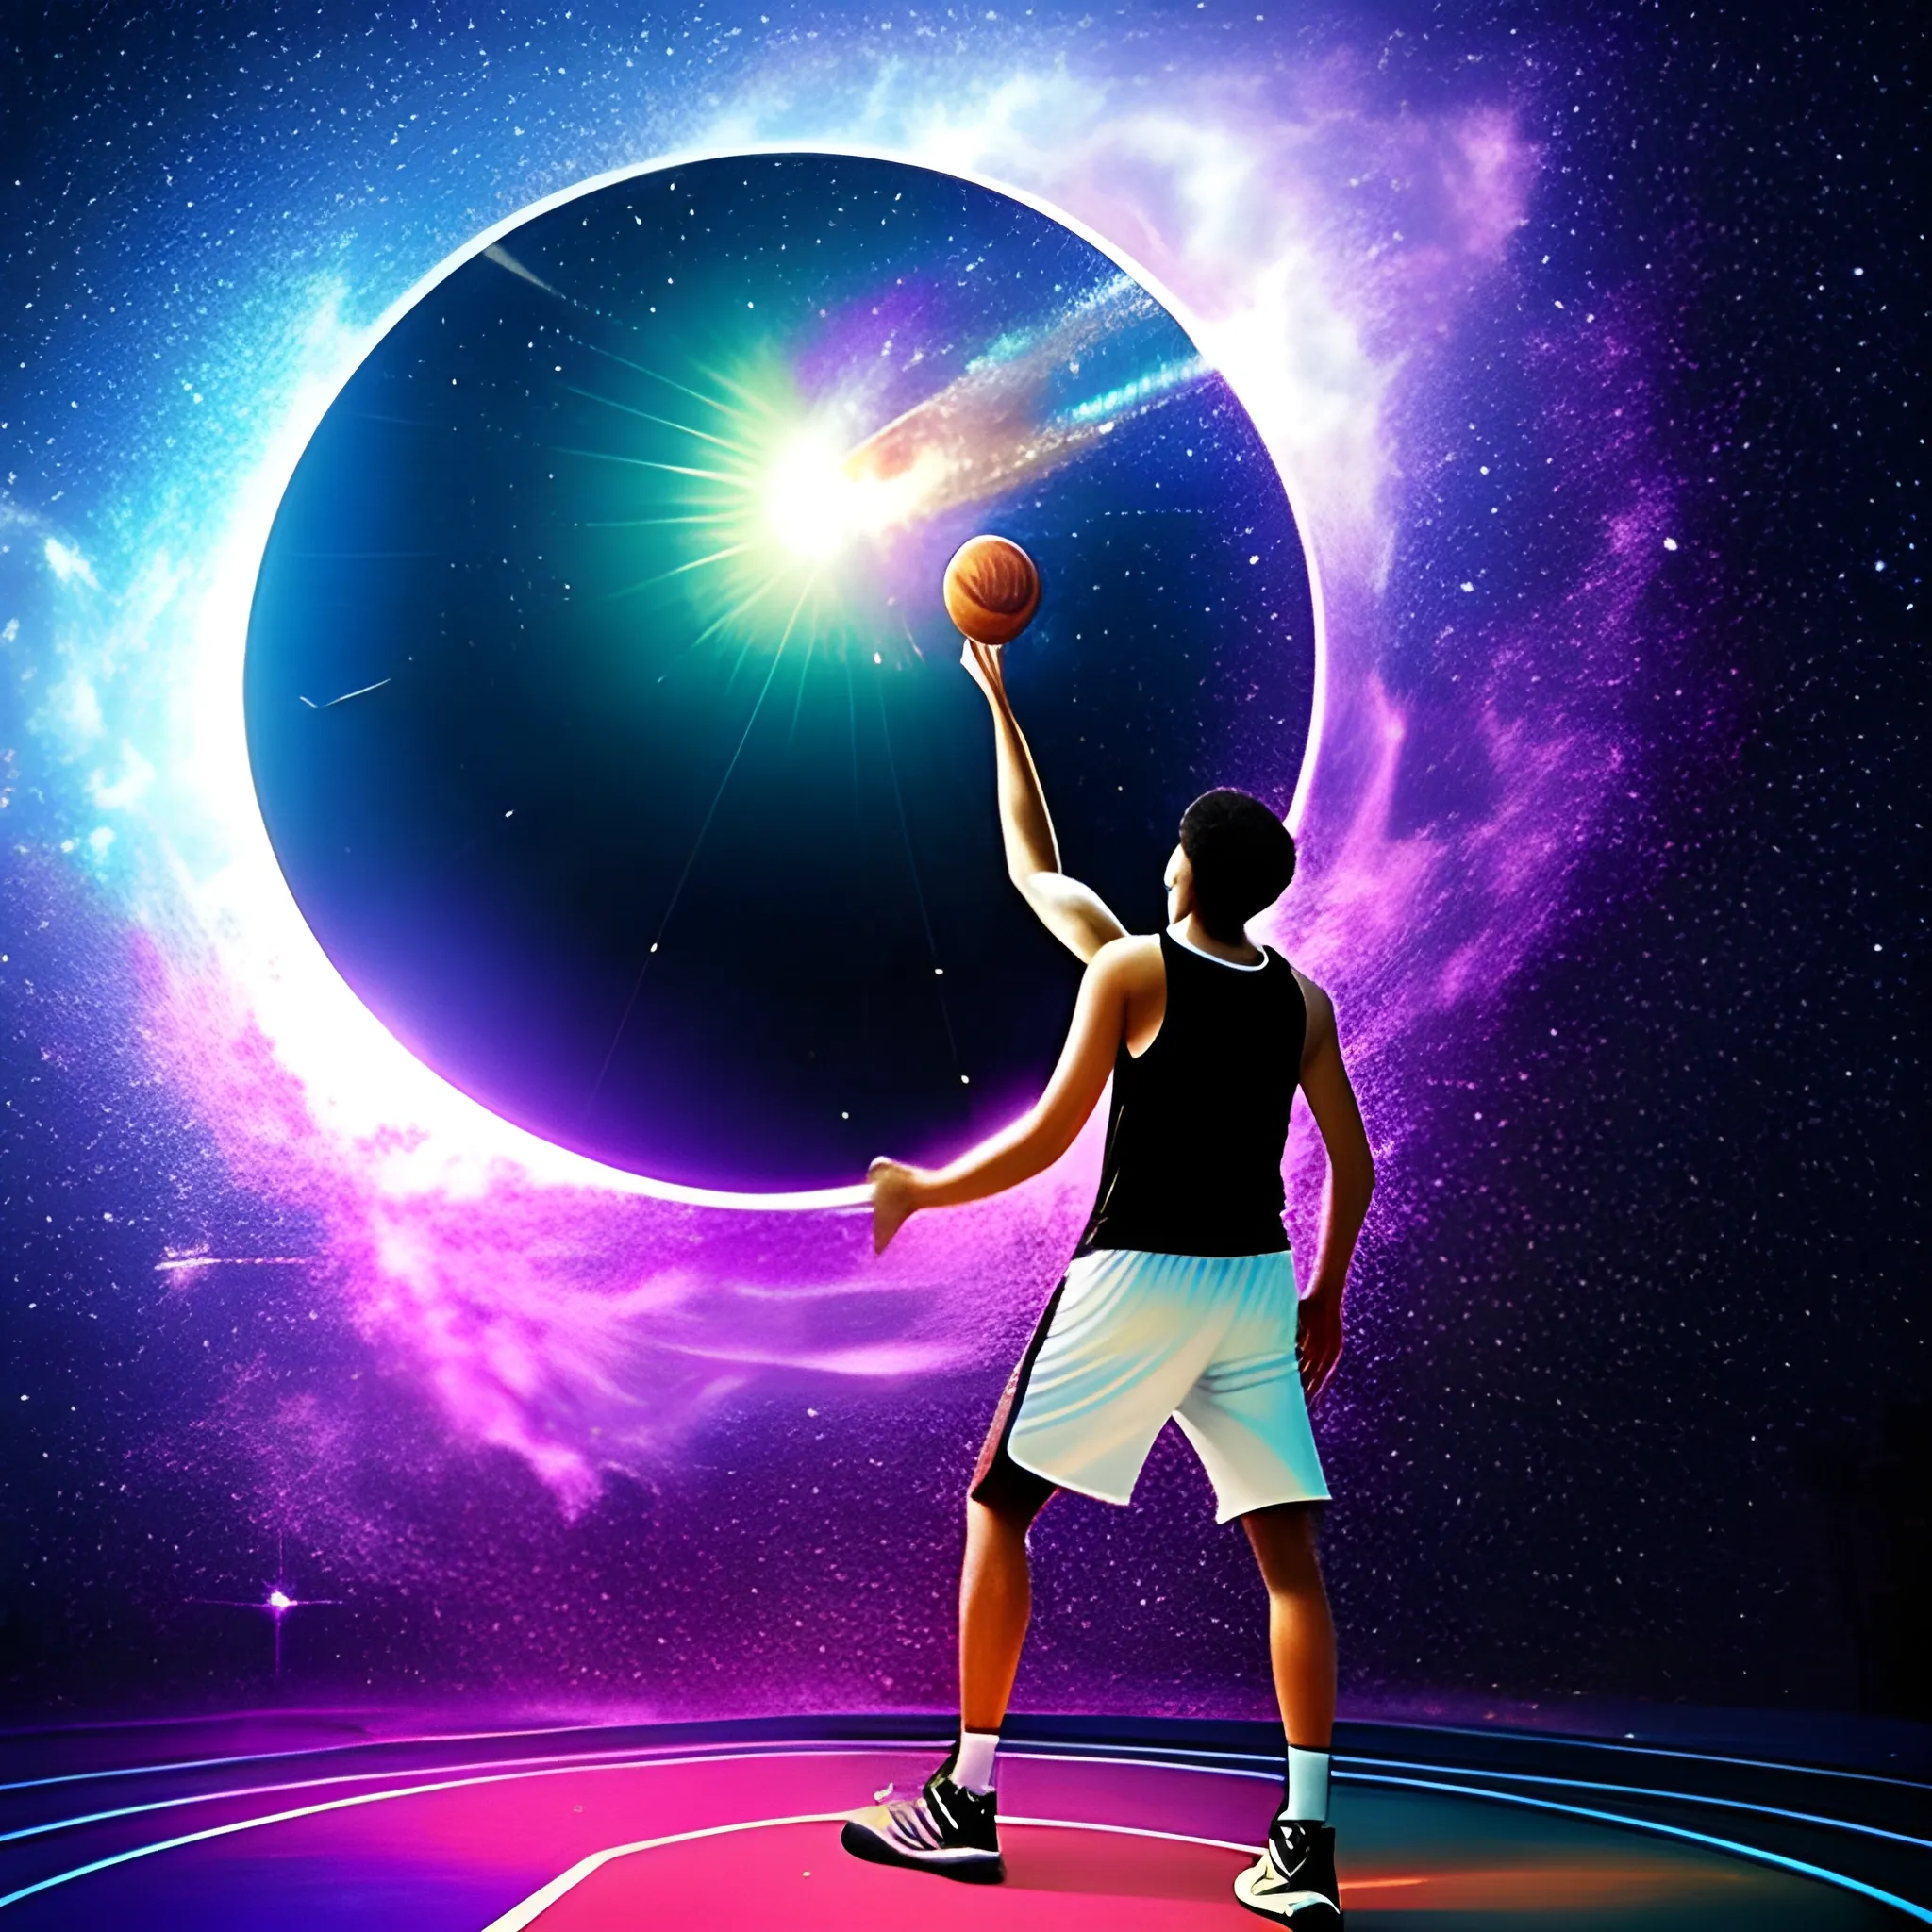 

A PLAYER FROM THE BACK SHOTS A BASKETBALL HOOP IN SPACE WITH A GALAXY IN THE BACKGROUND, Trippy